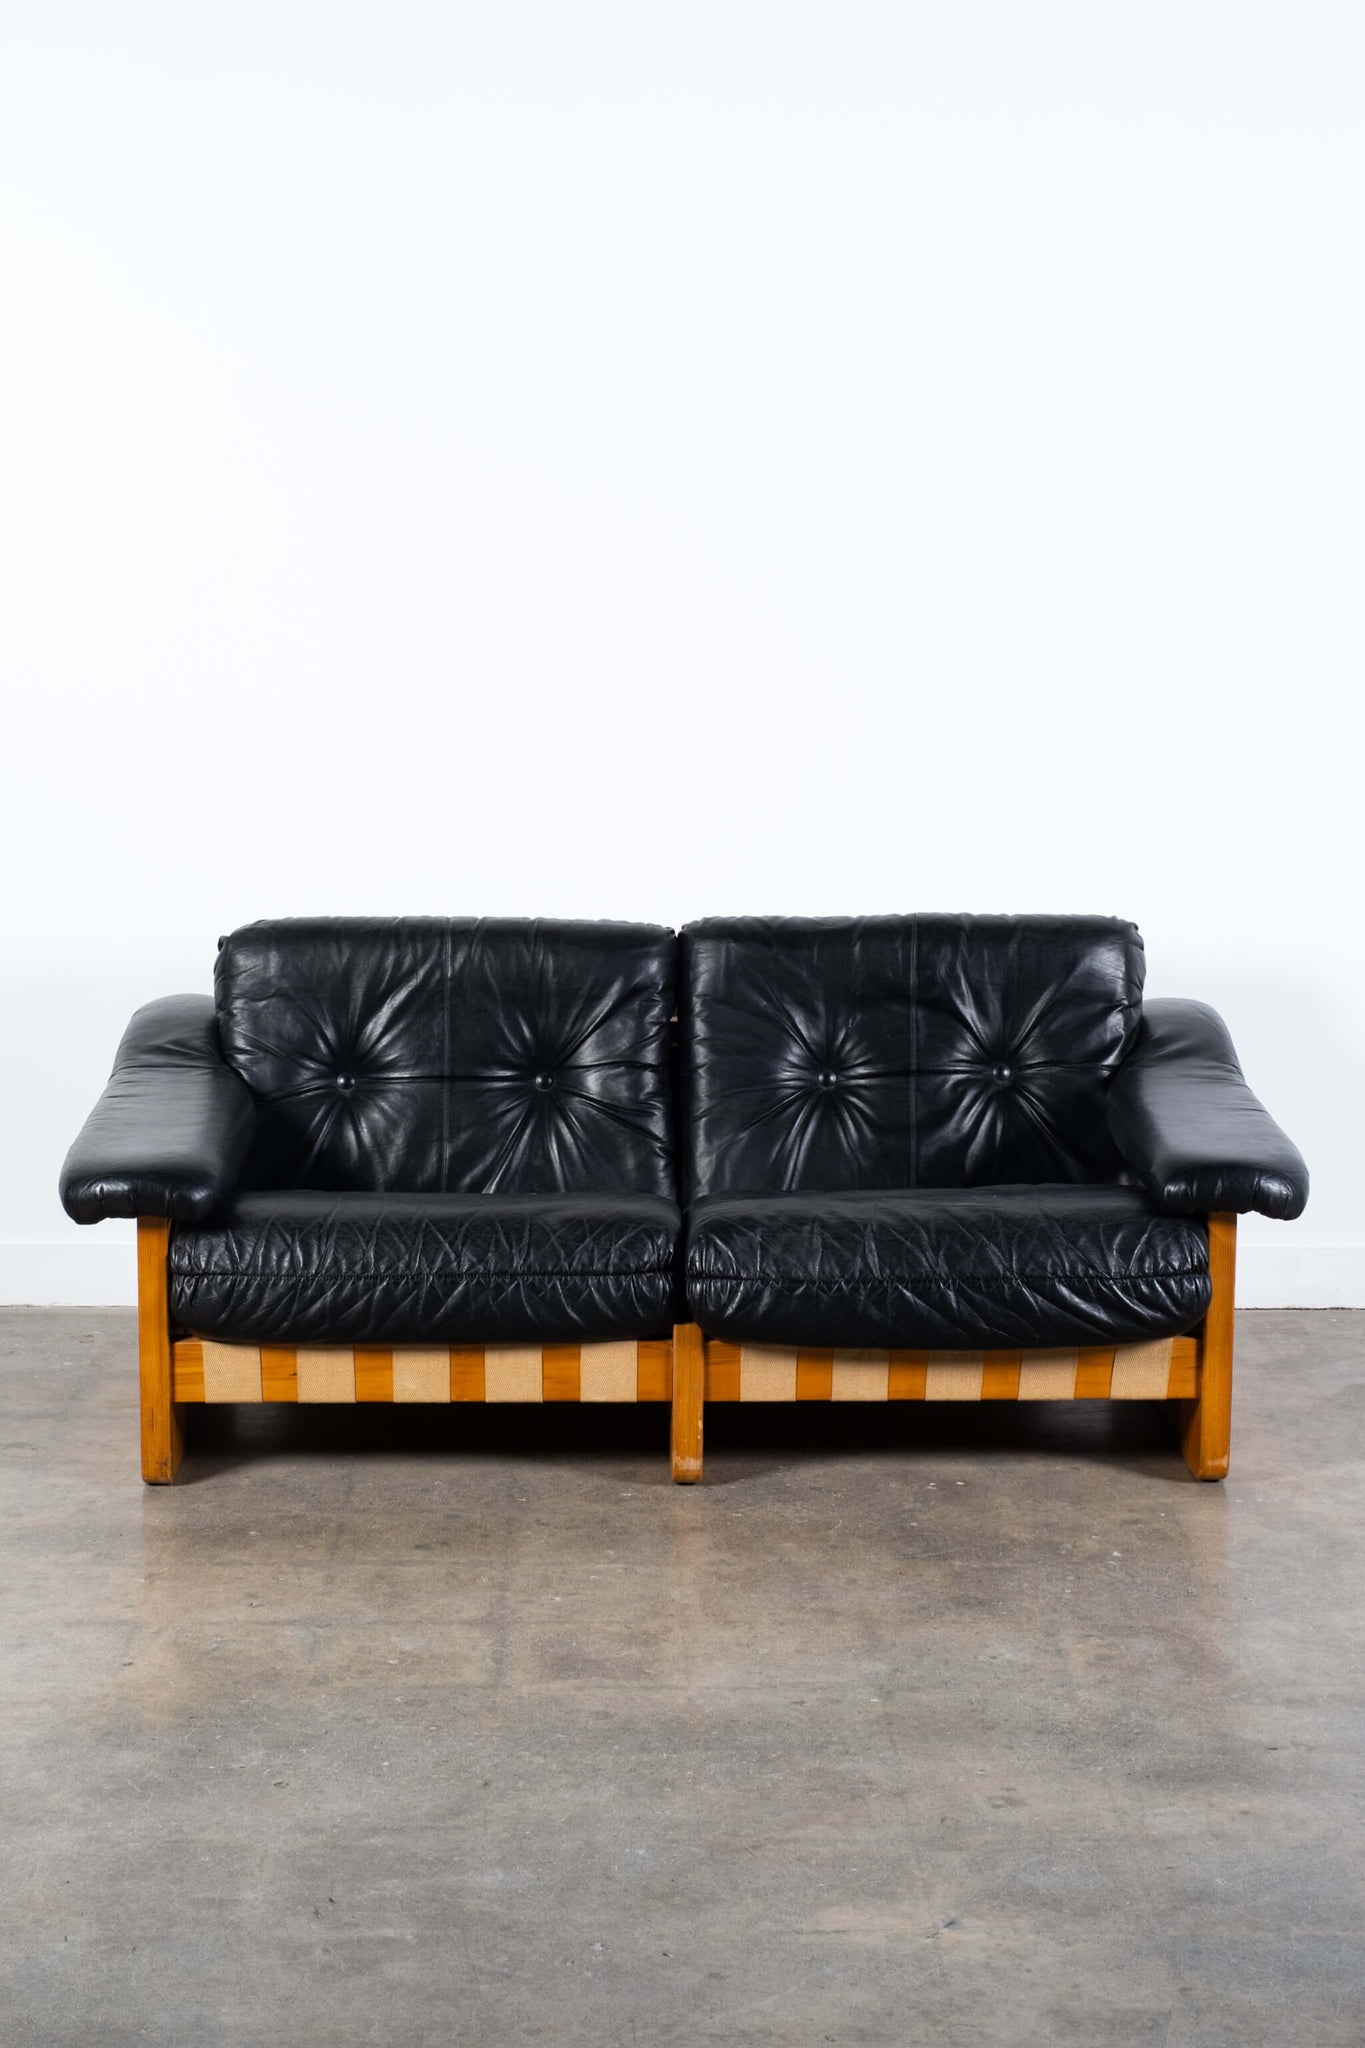 Vintage 1970s Italian 2-Seater Sofa in Pine and Black Leather, front view